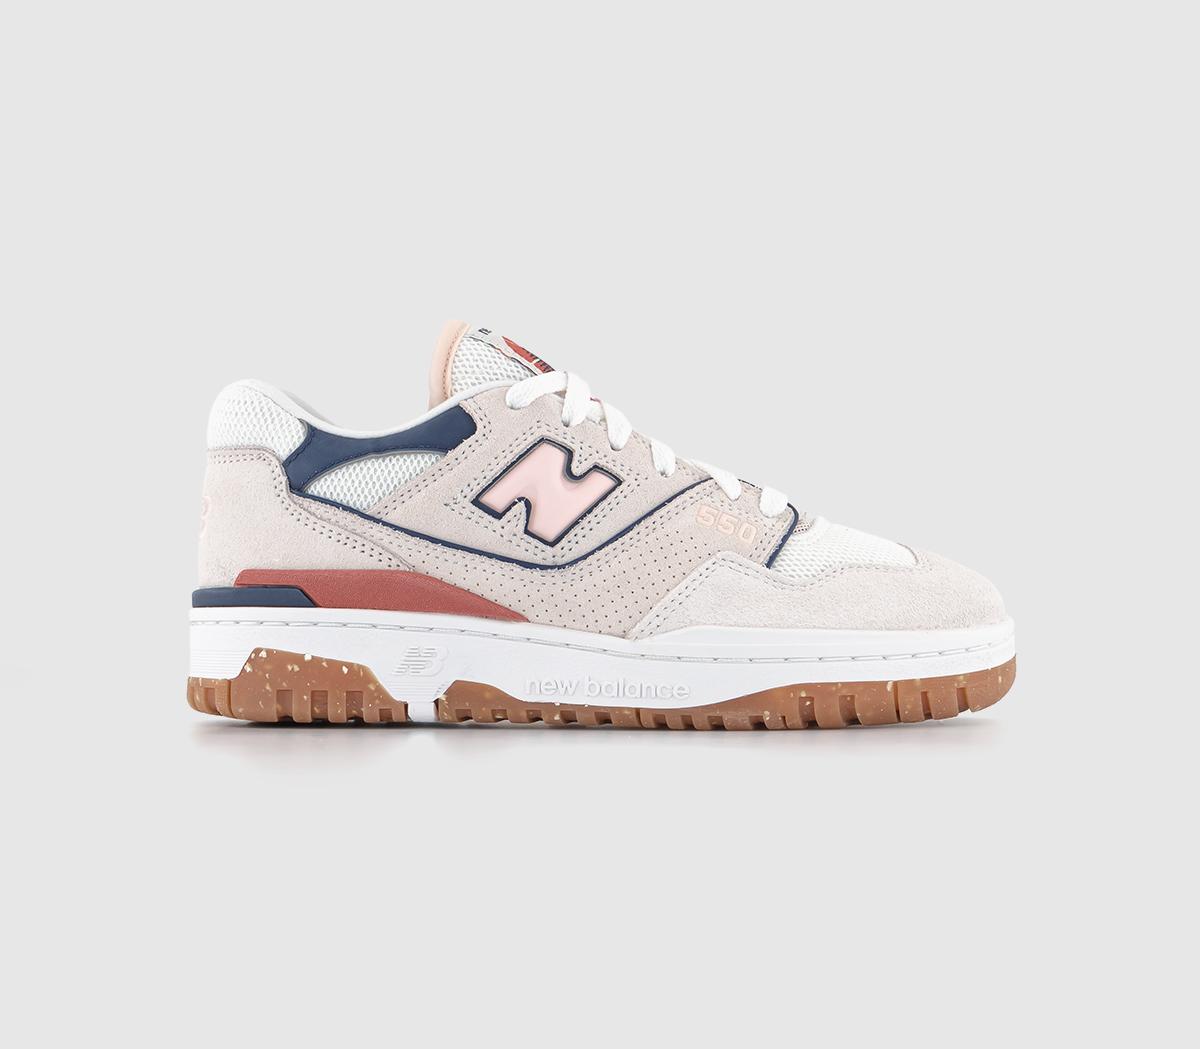 New Balance BB550 Trainers Sea Salt Navy Red - Women's Trainers